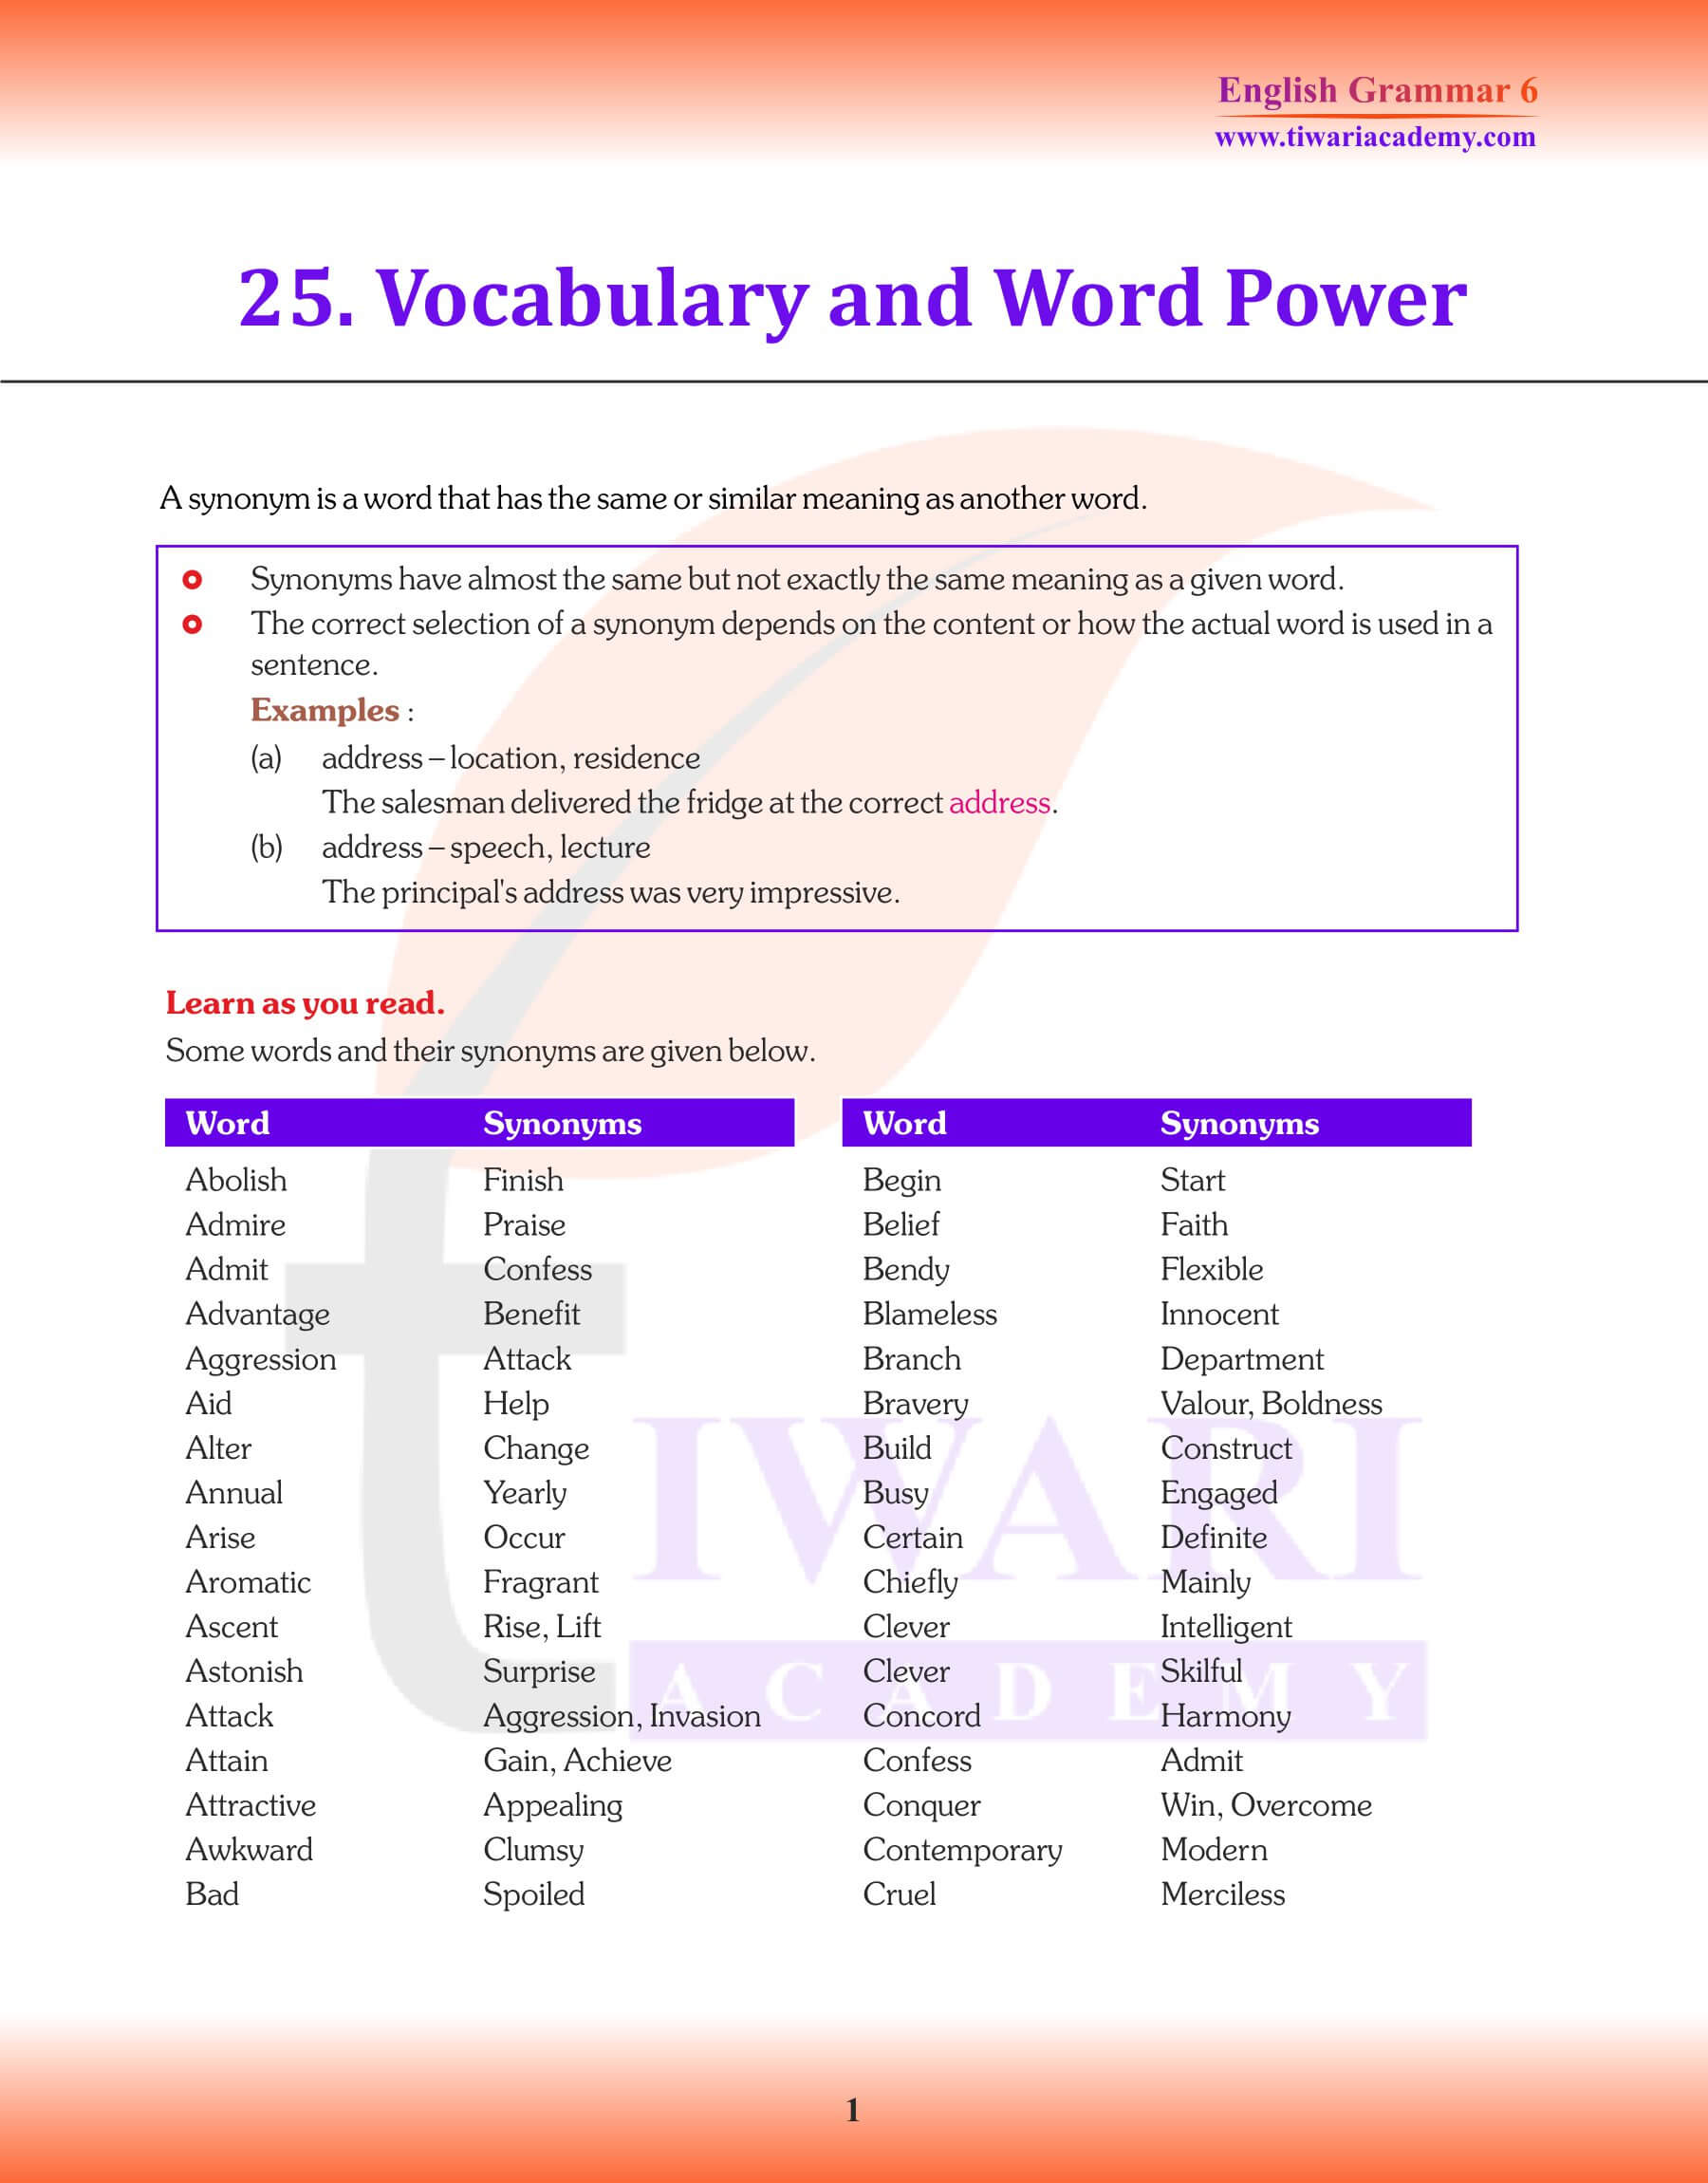 Class 6th English Grammar Vocabulary and Word Power